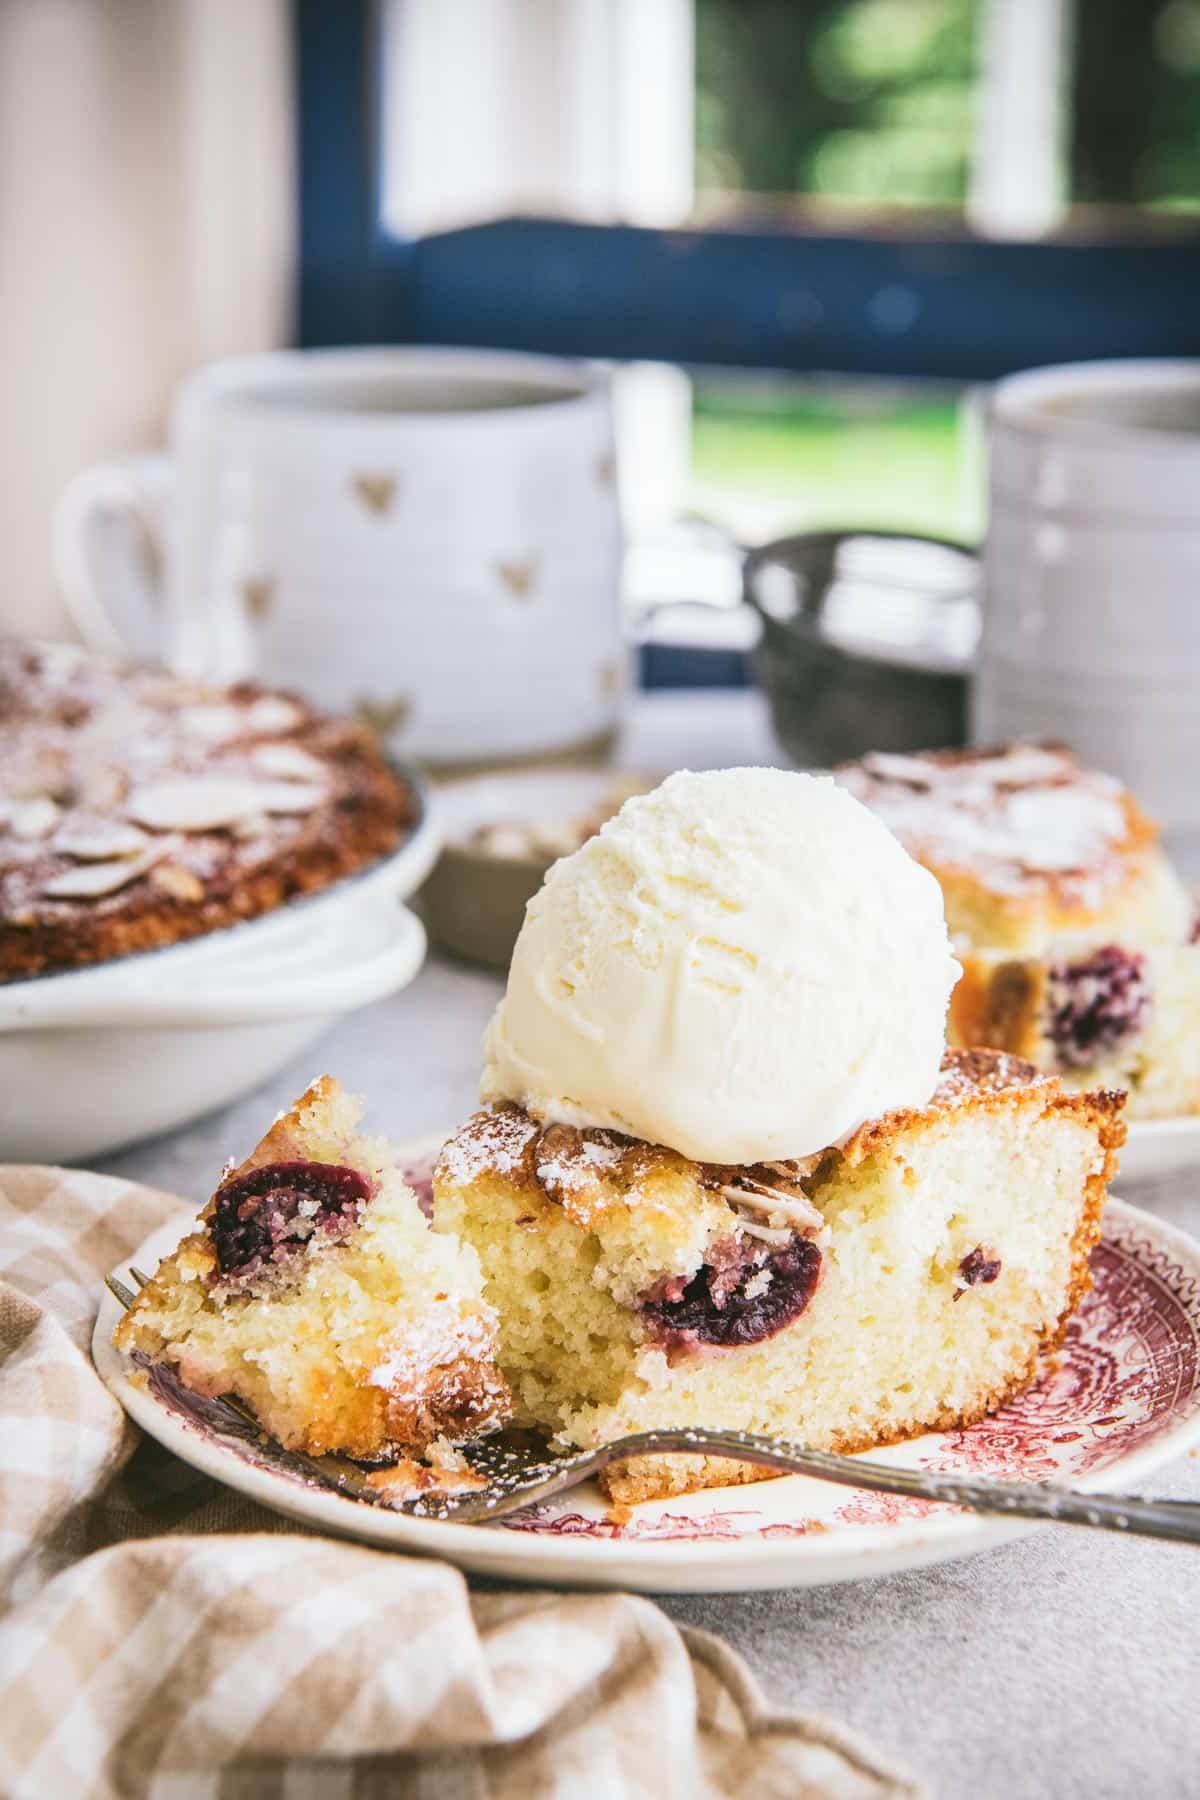 Slice of cherry cake on a plate with ice cream.